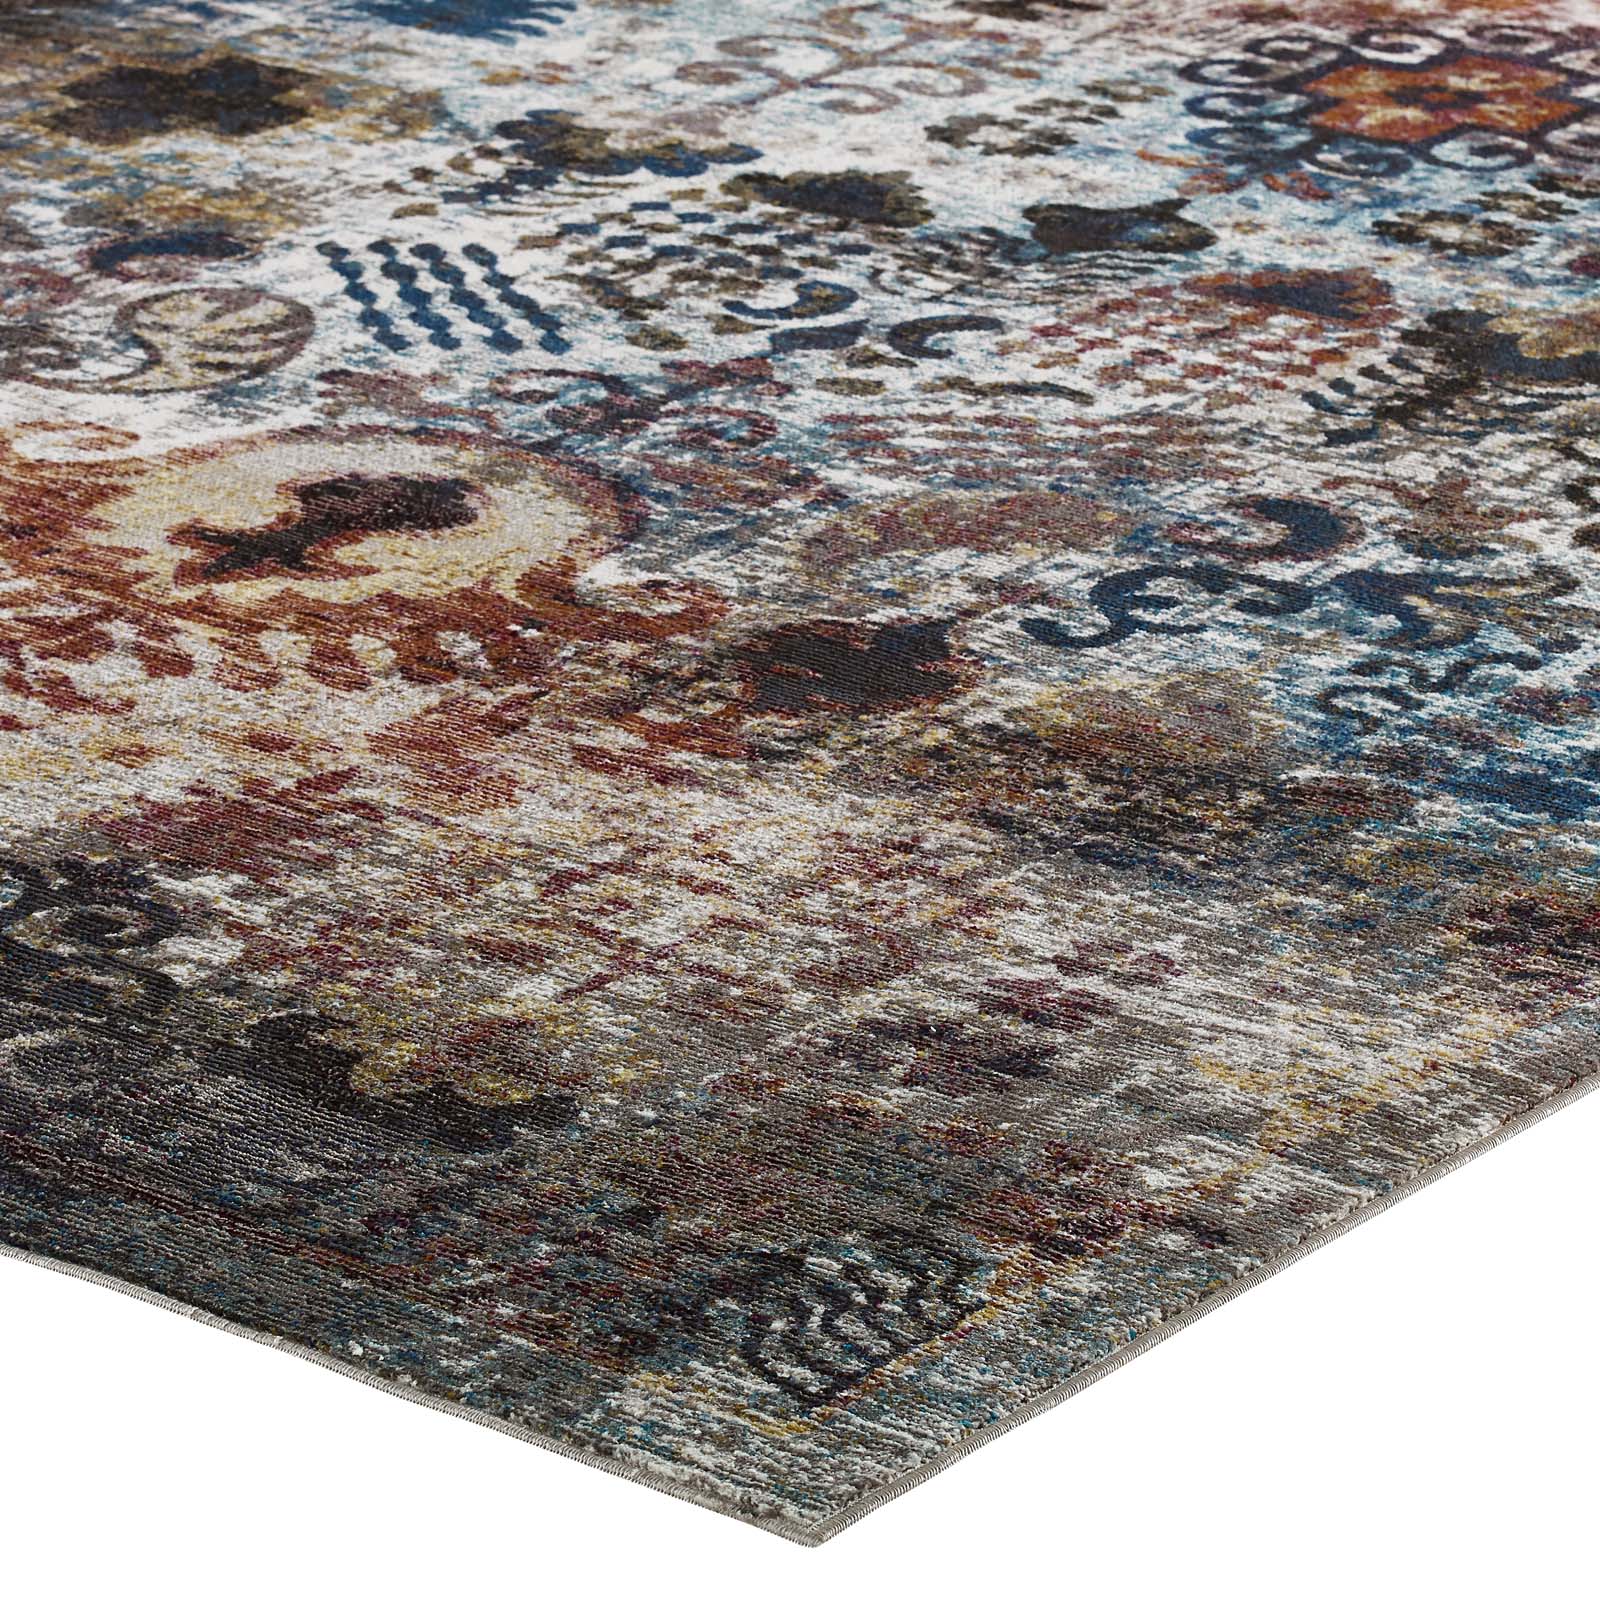 Success Tahira Transitional Distressed Vintage Floral Moroccan Trellis 8x10 Area Rug - East Shore Modern Home Furnishings